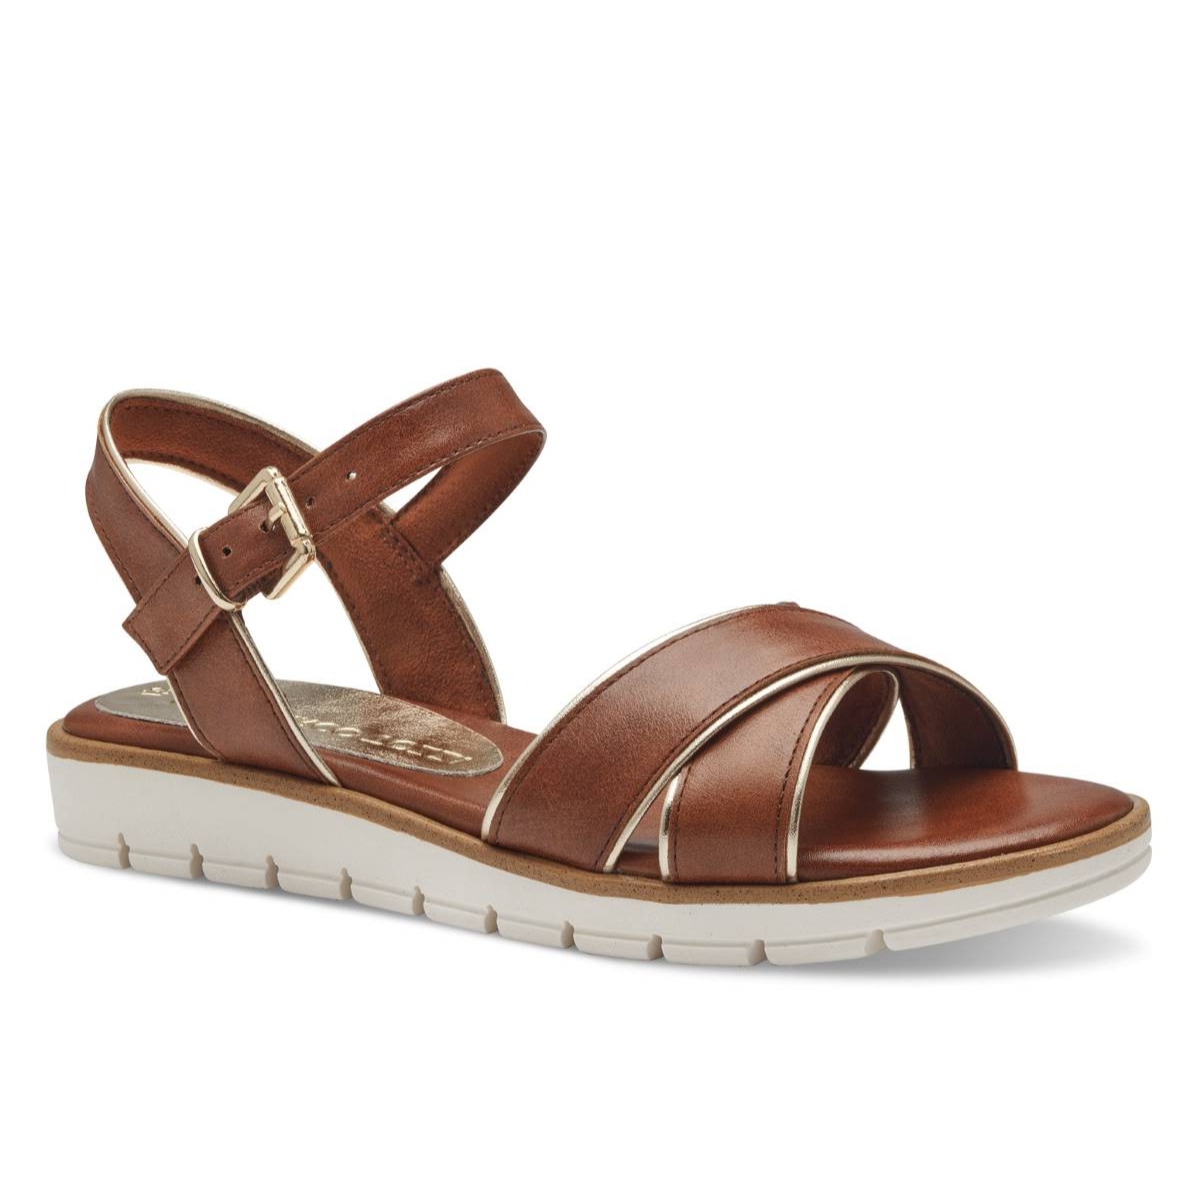 Marco Tozzi Cento Tan Womens Flat Sandals 28601-42-392 in a Plain Man-made in Size 41